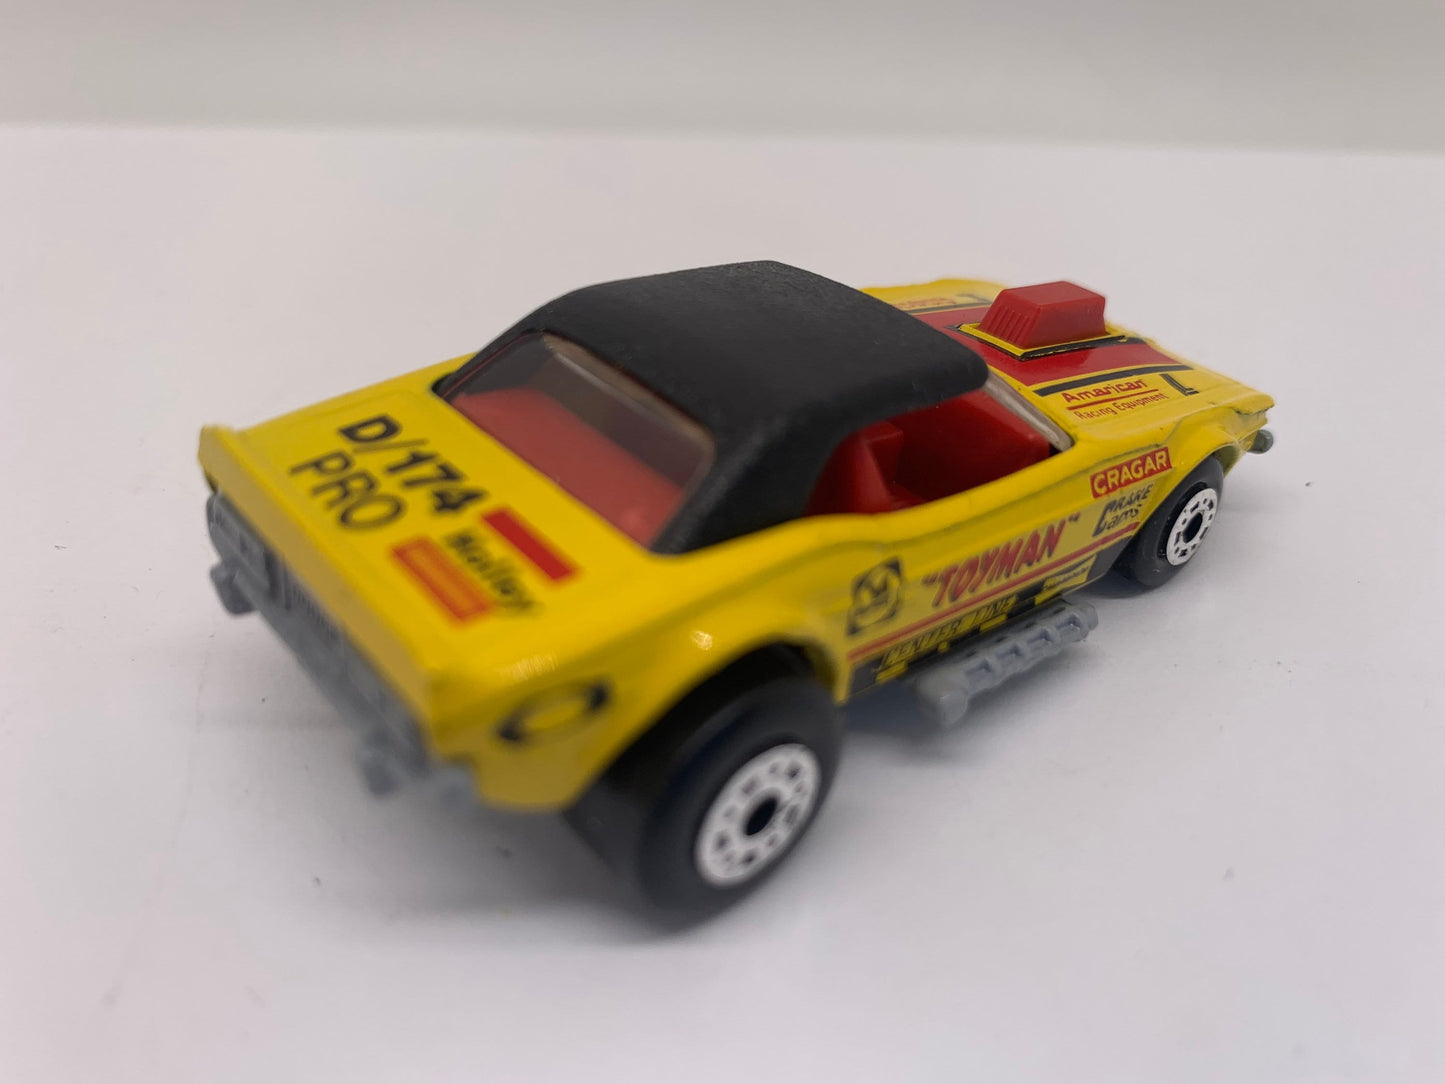 Matchbox Dodge Challenger Toyman Yellow Superfast Perfect Birthday Gift Miniature Collectable Scale Model Toy Car